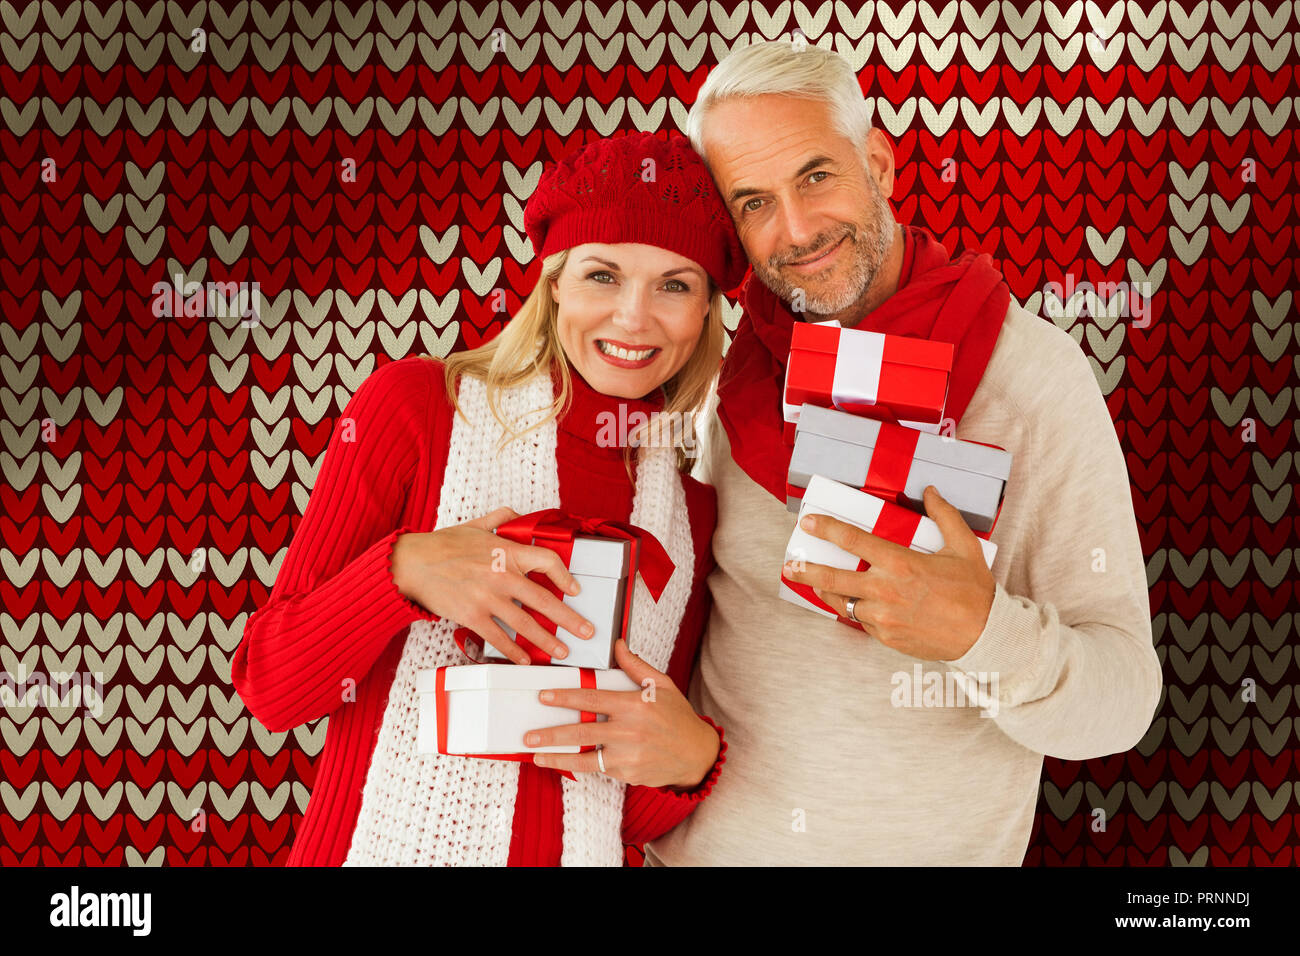 Composite image of happy festive couple with gifts Stock Photo